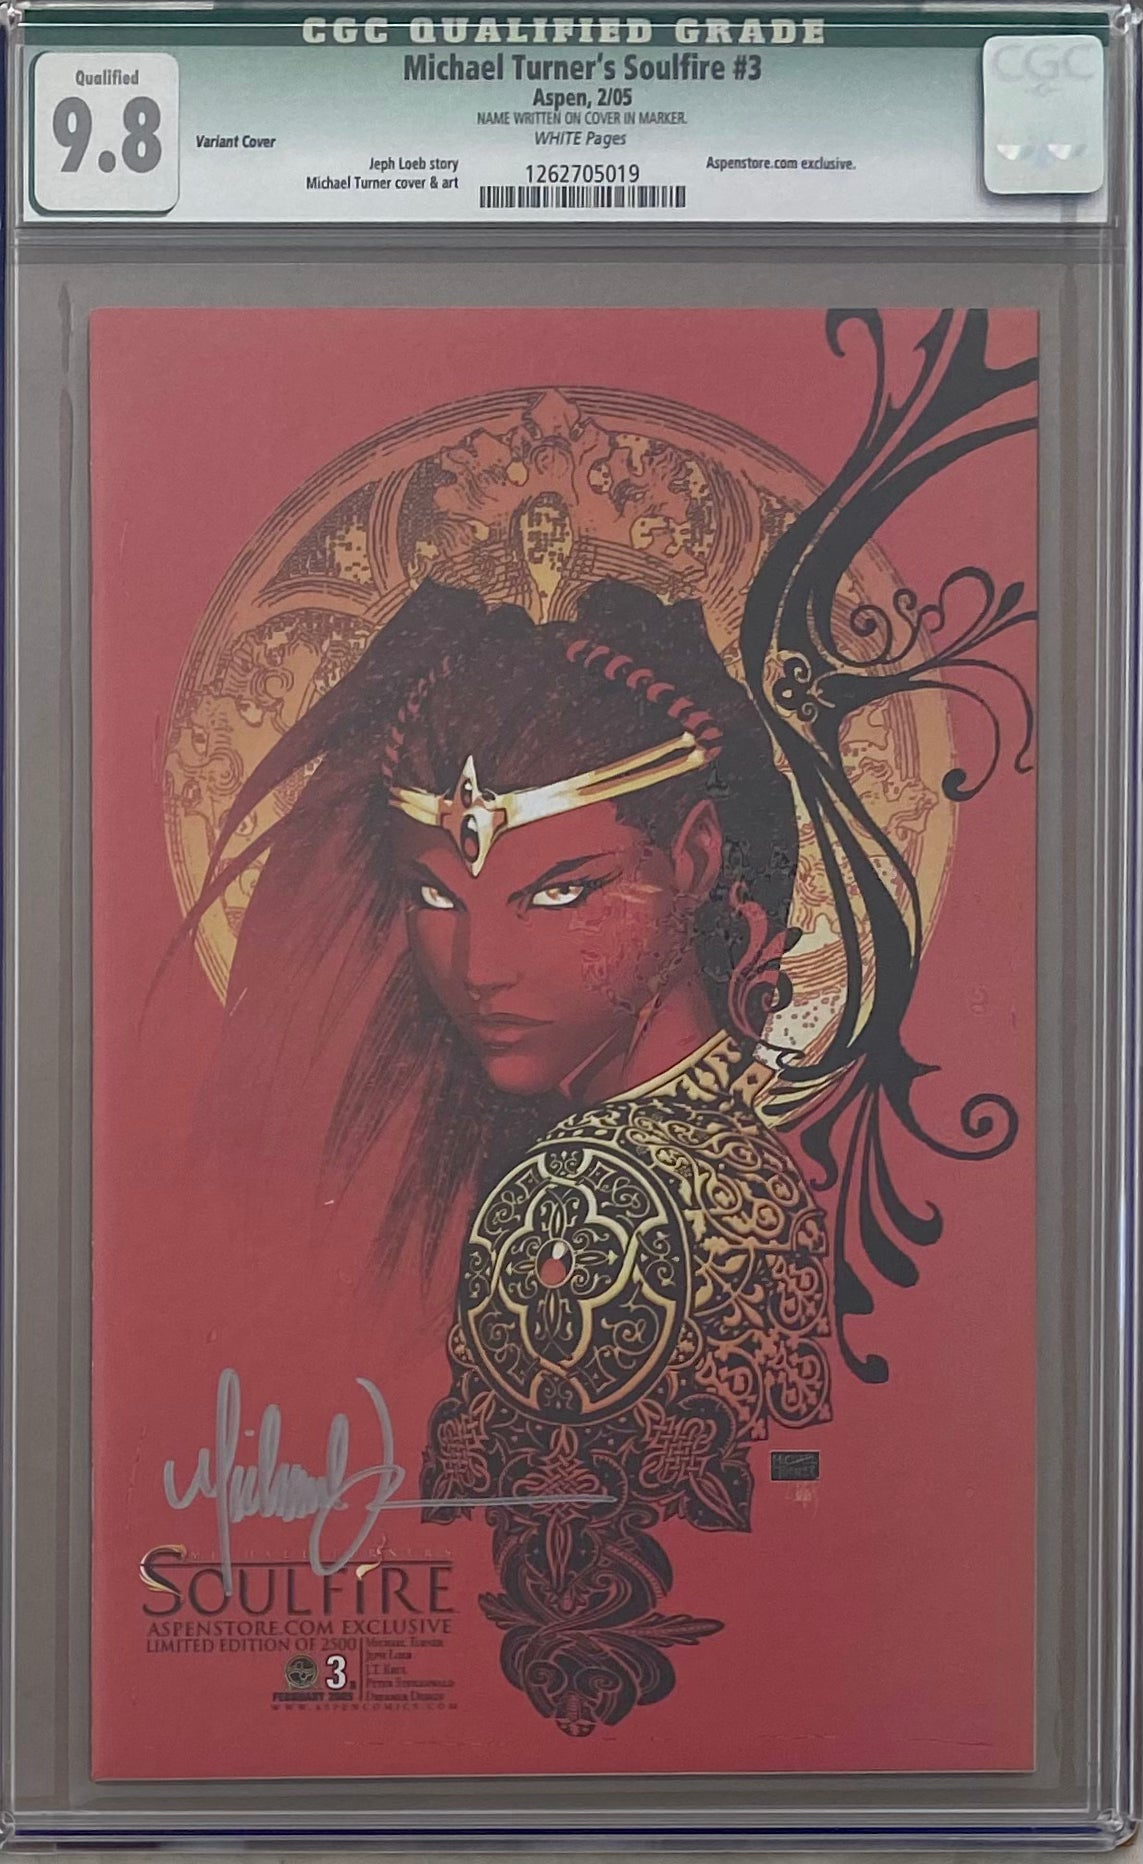 Michael Turner's Soulfire #3 Variant CGC 9.8 Qualified